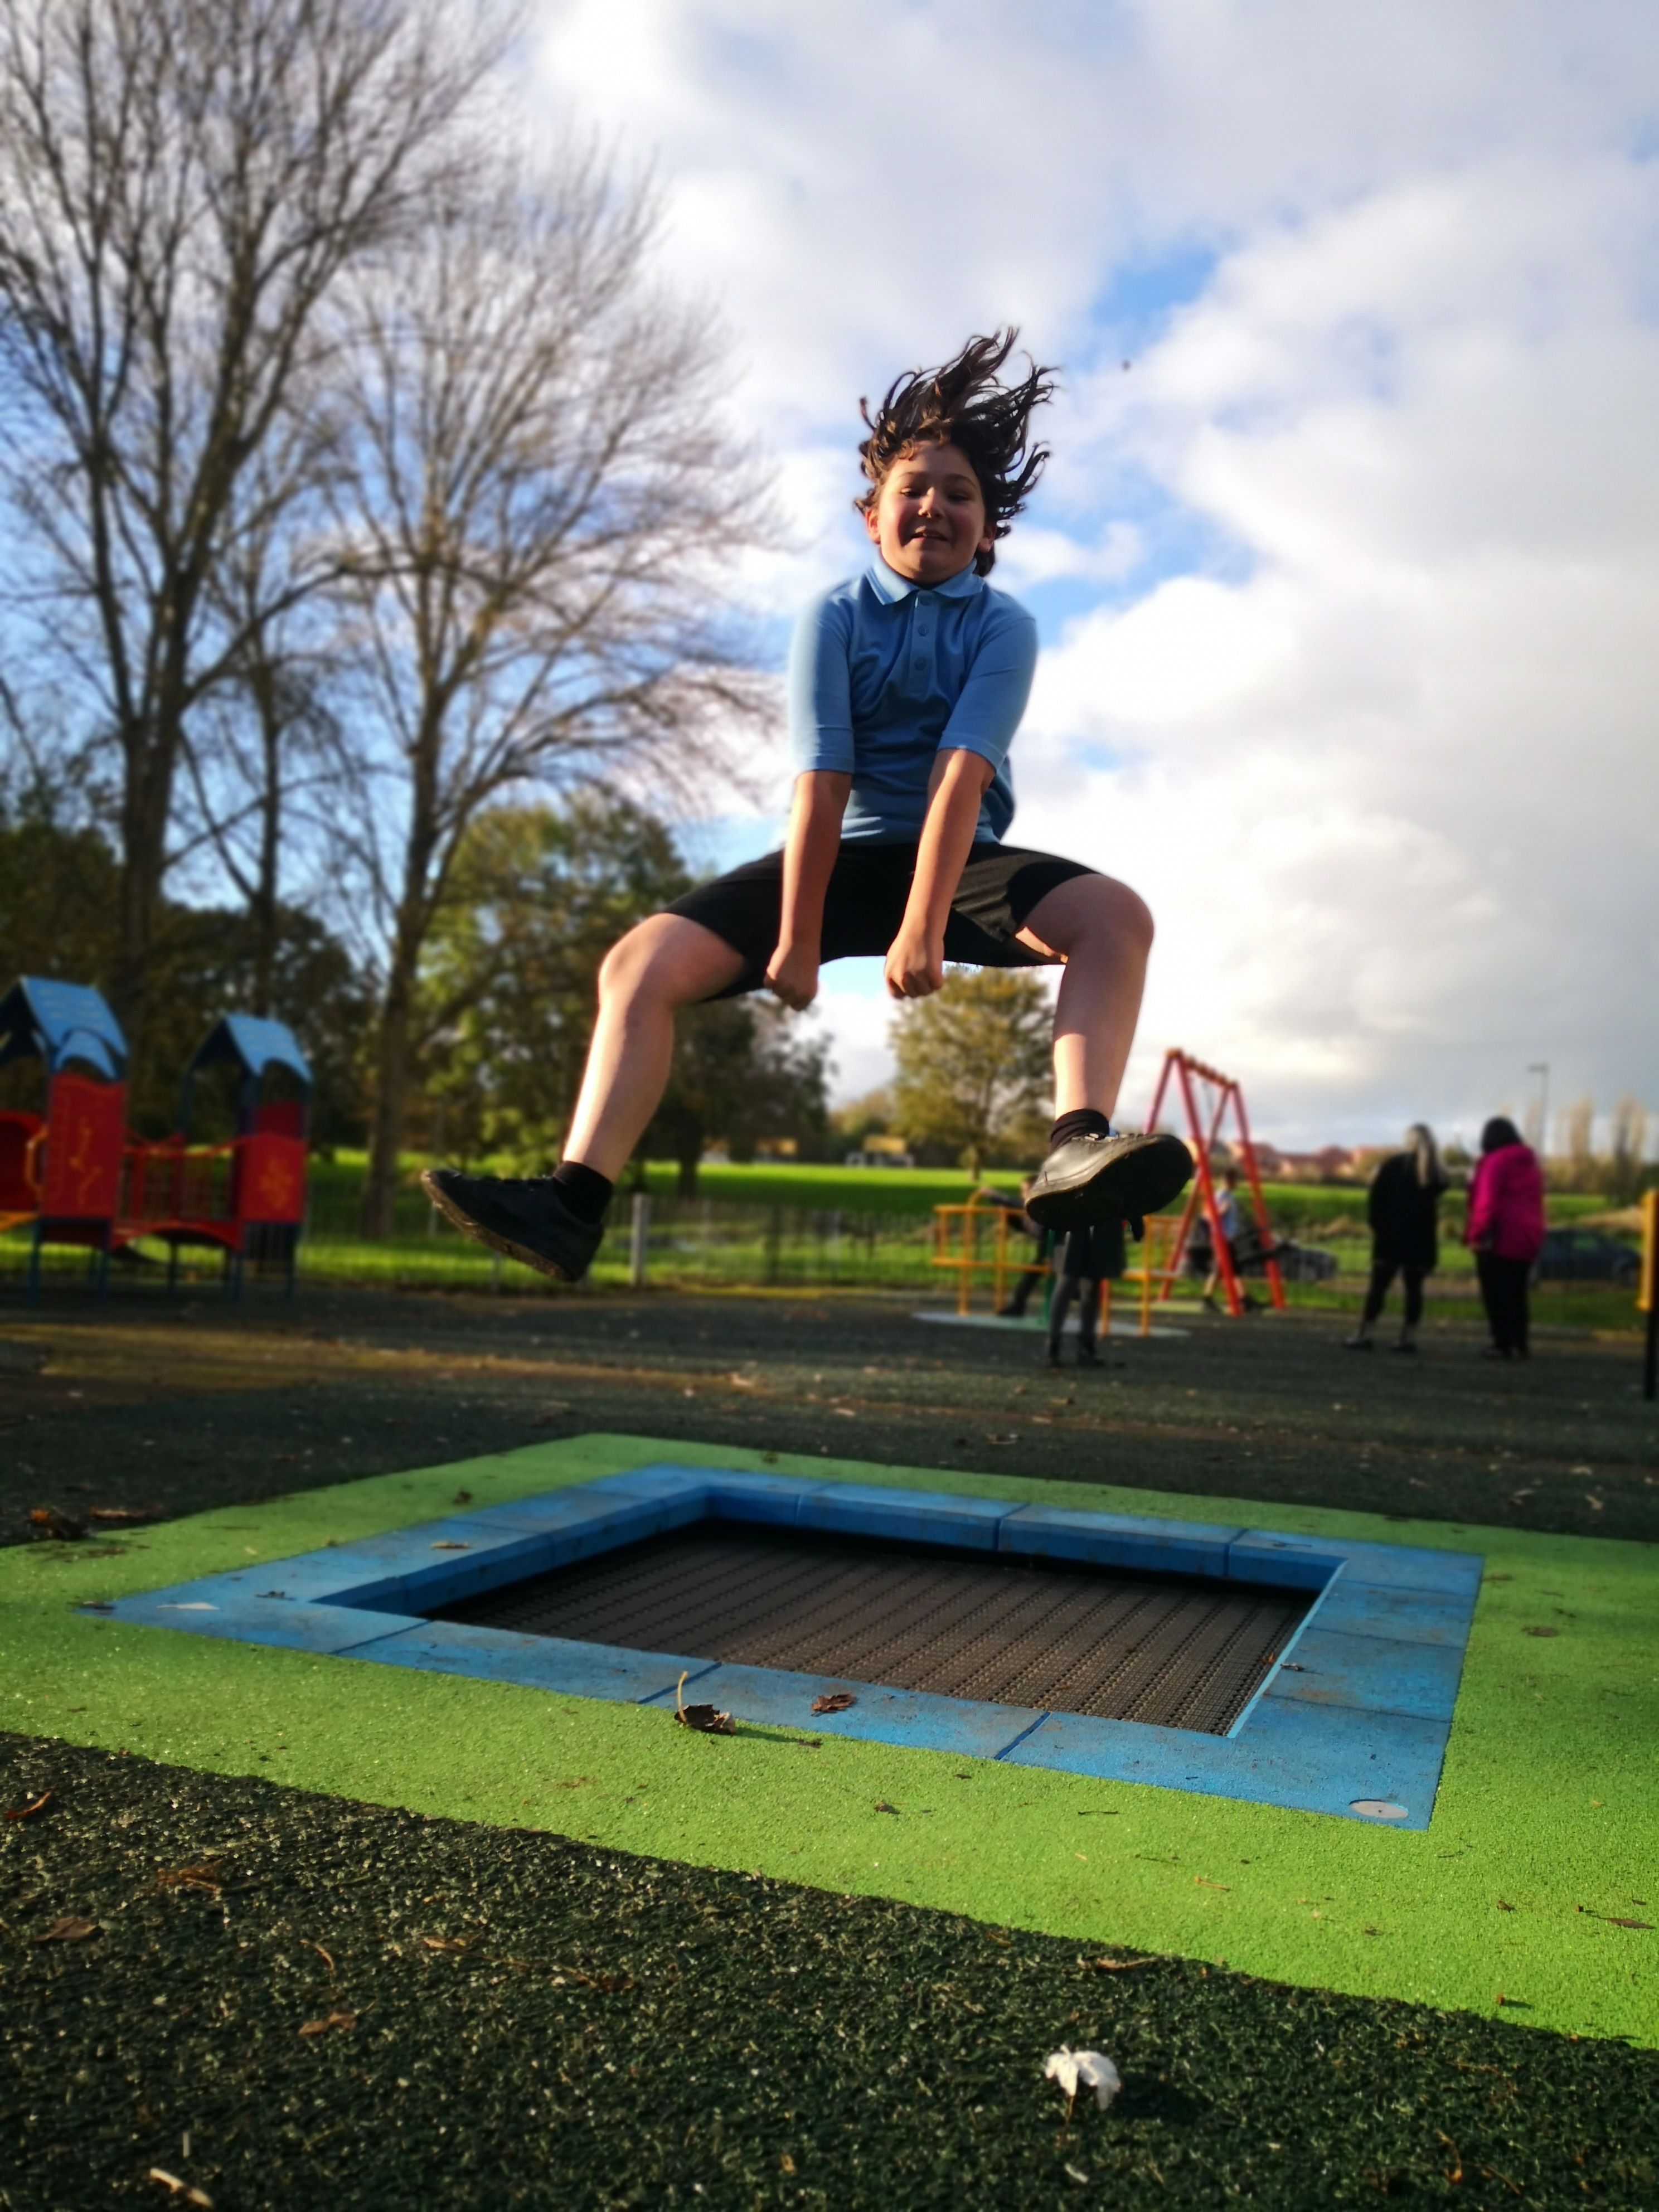 A child jumping in the air from a trampoline at Lambley Lane play area